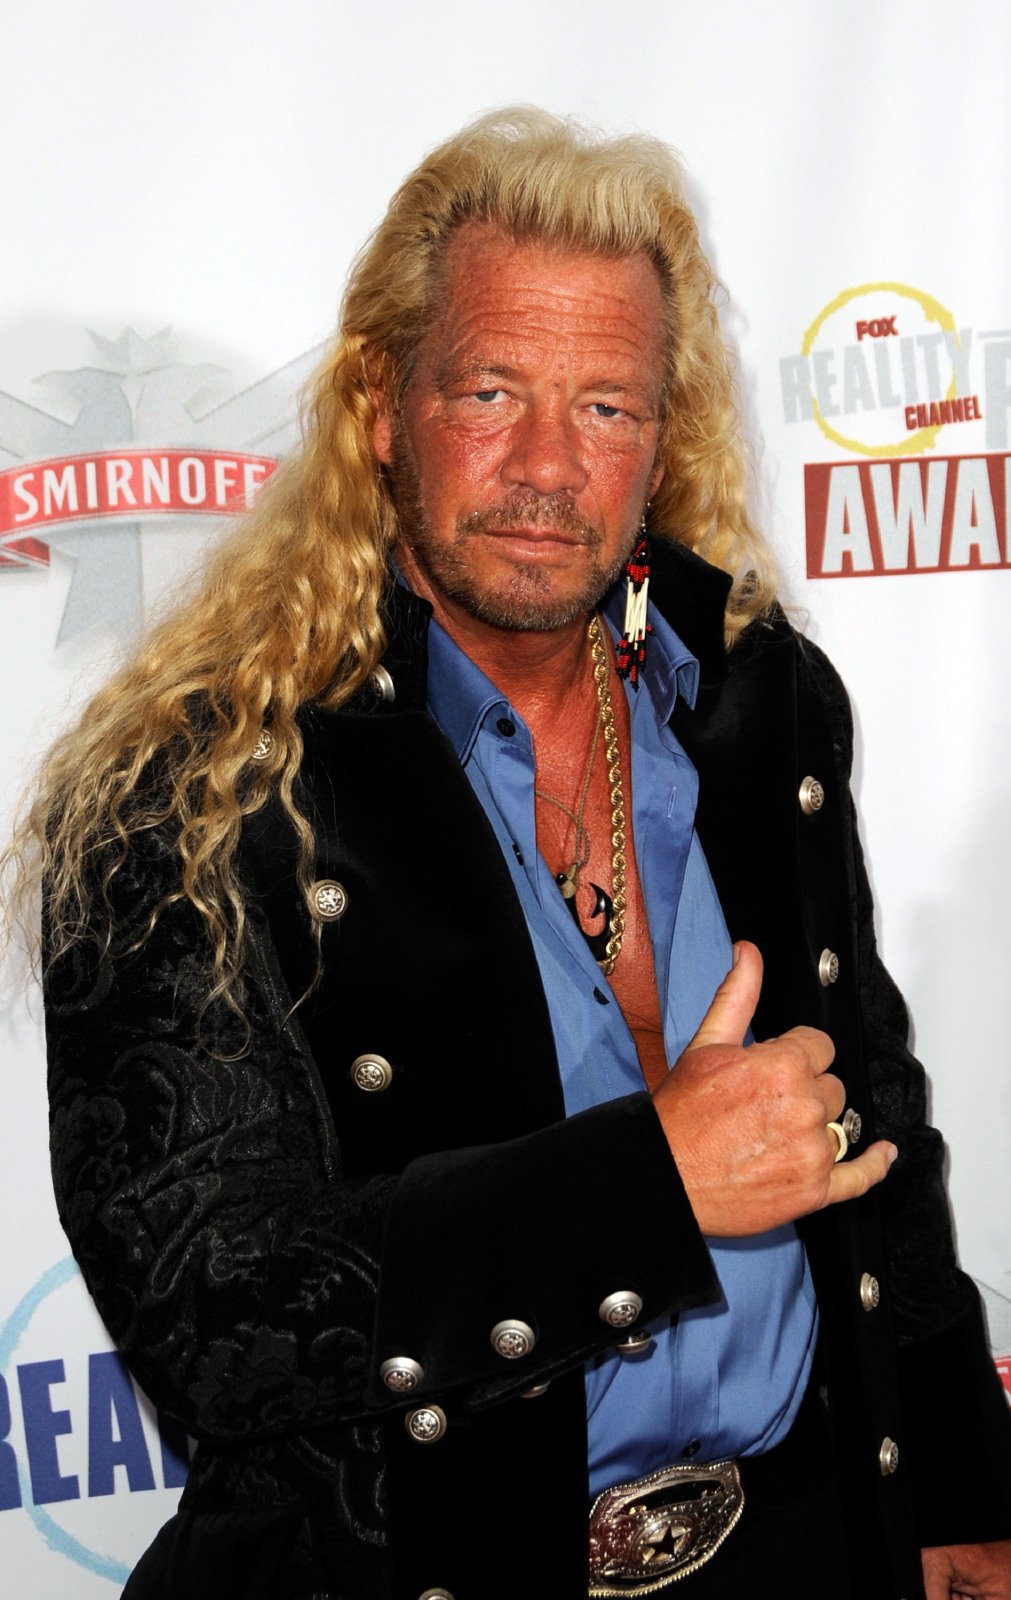 Duane "Dog" Chapman arrives at the Fox Reality Channel Really Awards on September 24, 2008 | Photo: Getty Images 